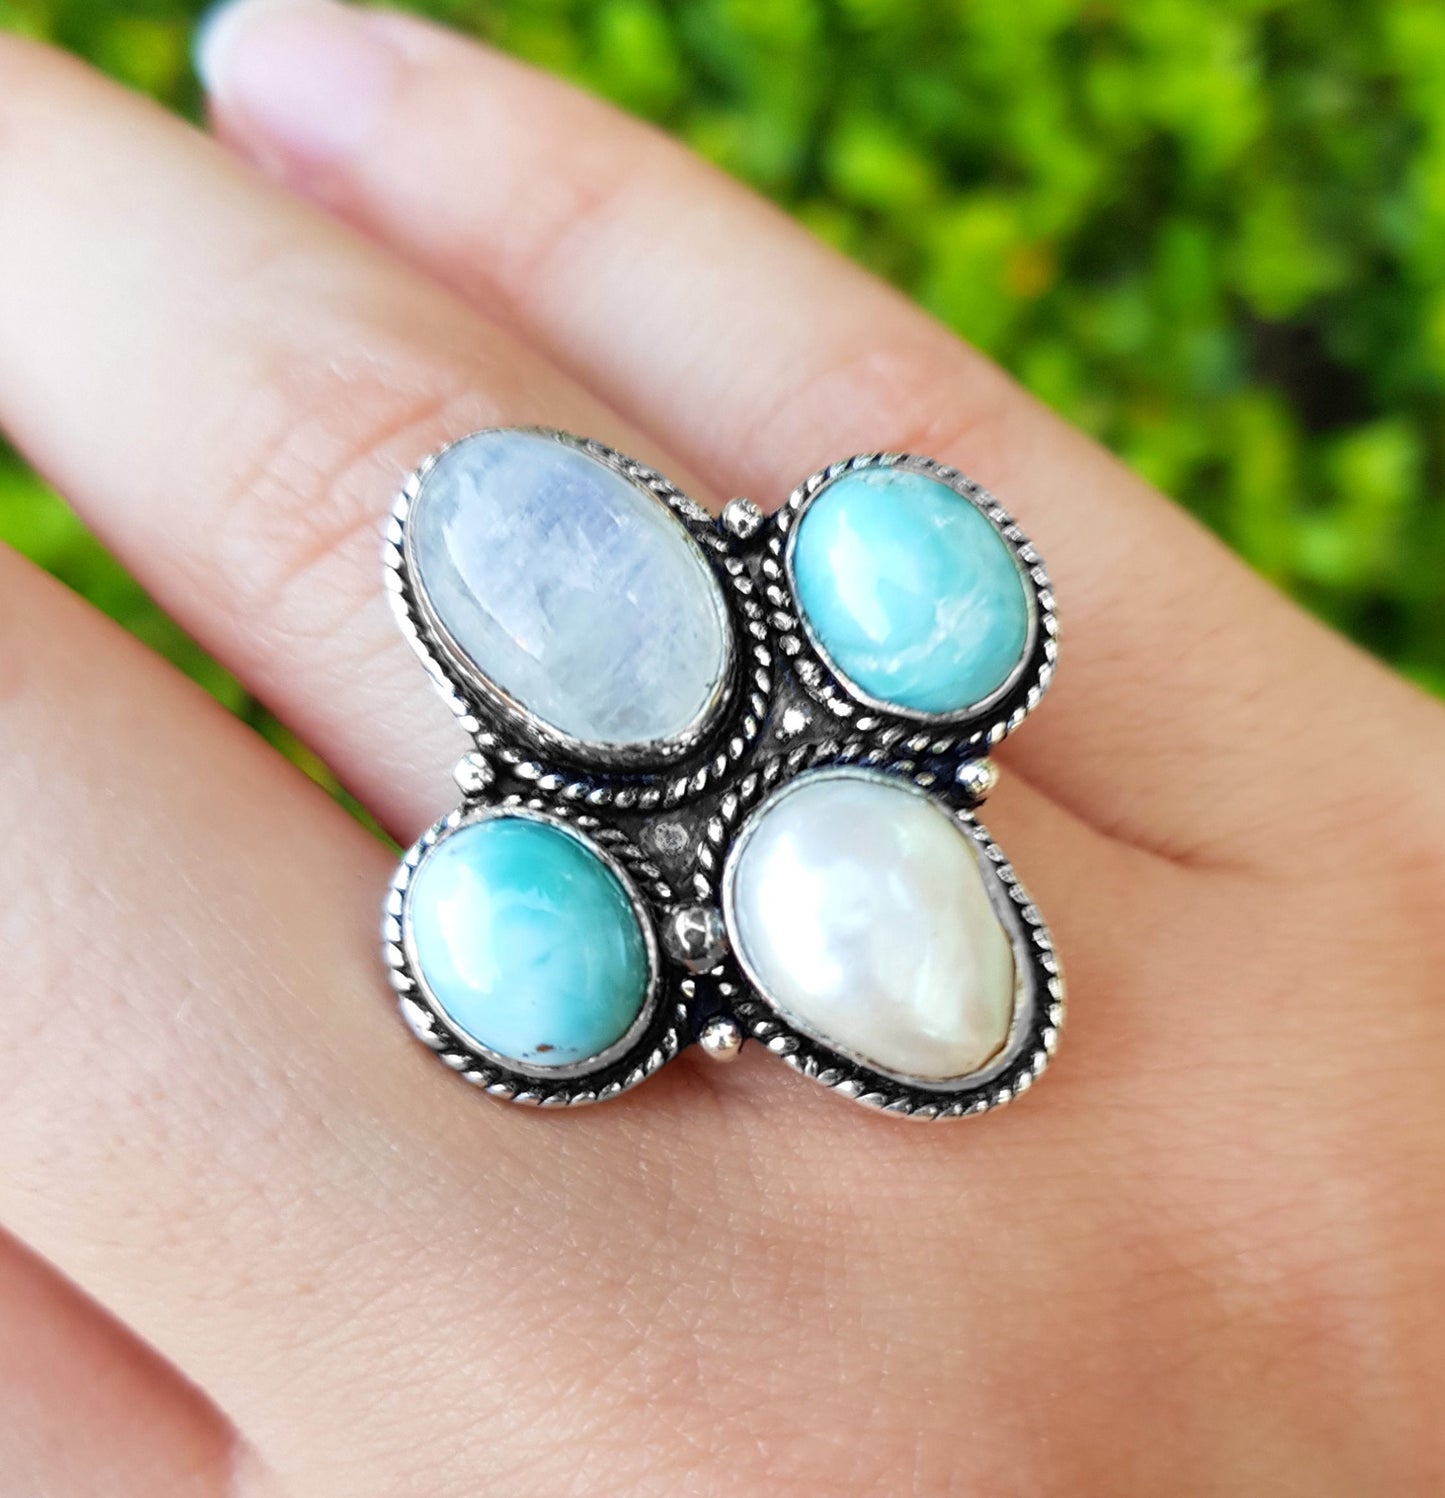 Multi Stone Ring Moonstone Pearl Larimar Statement Ring Size US 7 3/4 Sterling Silver Boho Rings